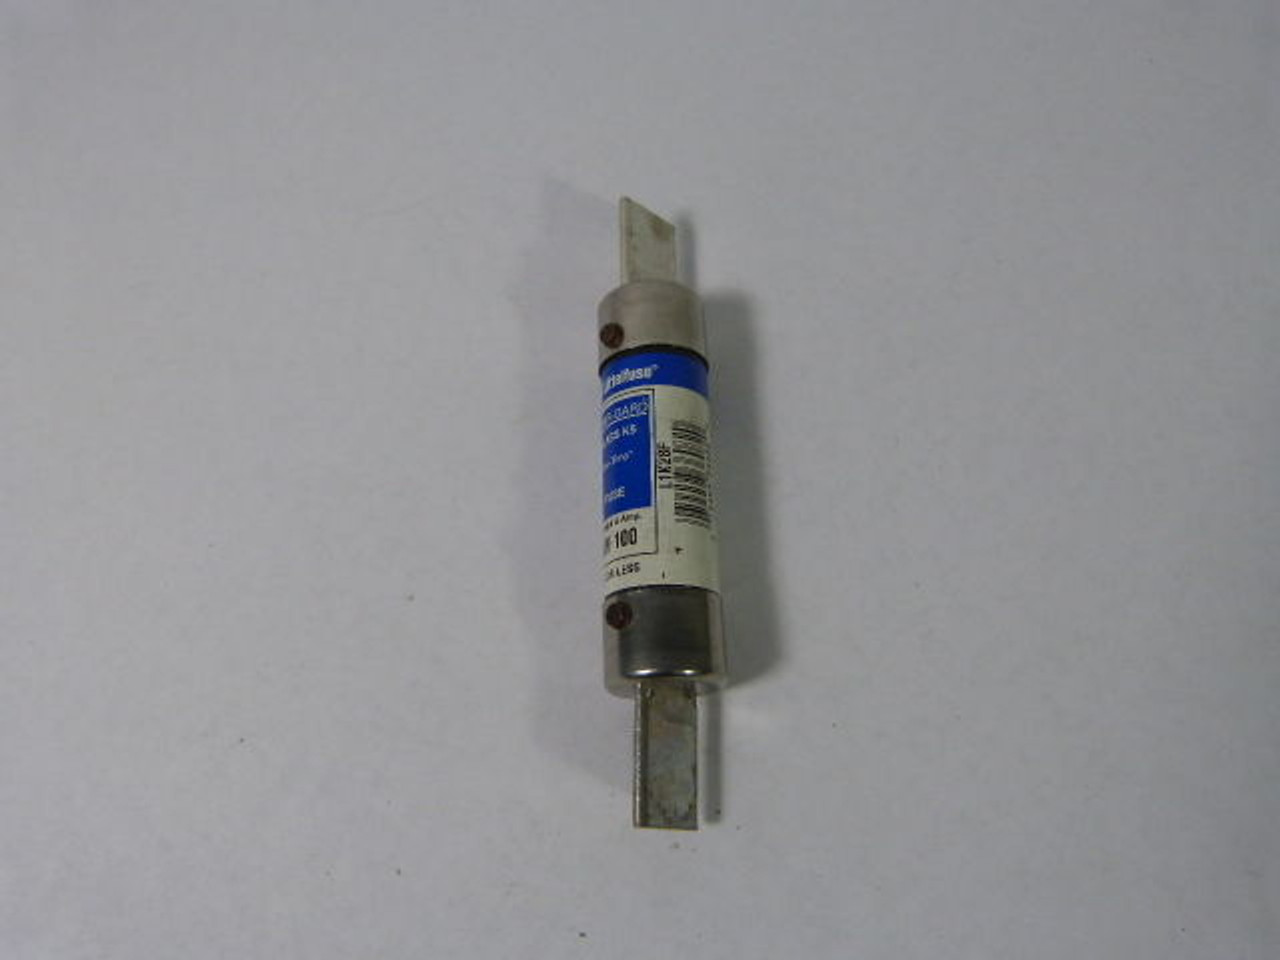 Littelfuse NLN-100 One Time Fuse 100A 250V USED